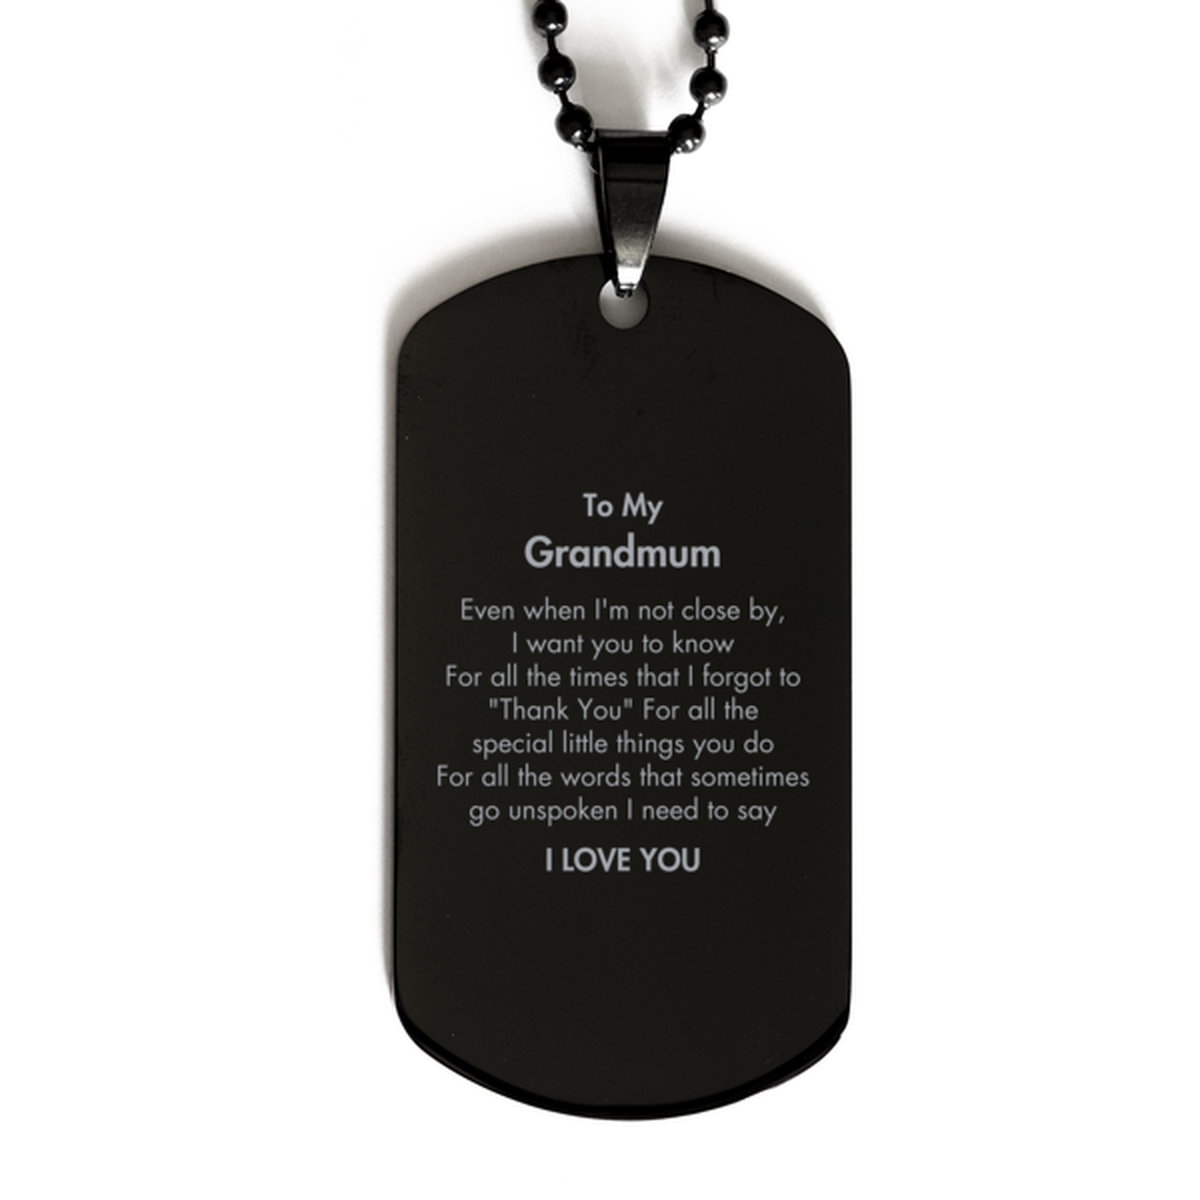 Thank You Gifts for Grandmum, Keepsake Black Dog Tag Gifts for Grandmum Birthday Mother's day Father's Day Grandmum For all the words That sometimes go unspoken I need to say I LOVE YOU